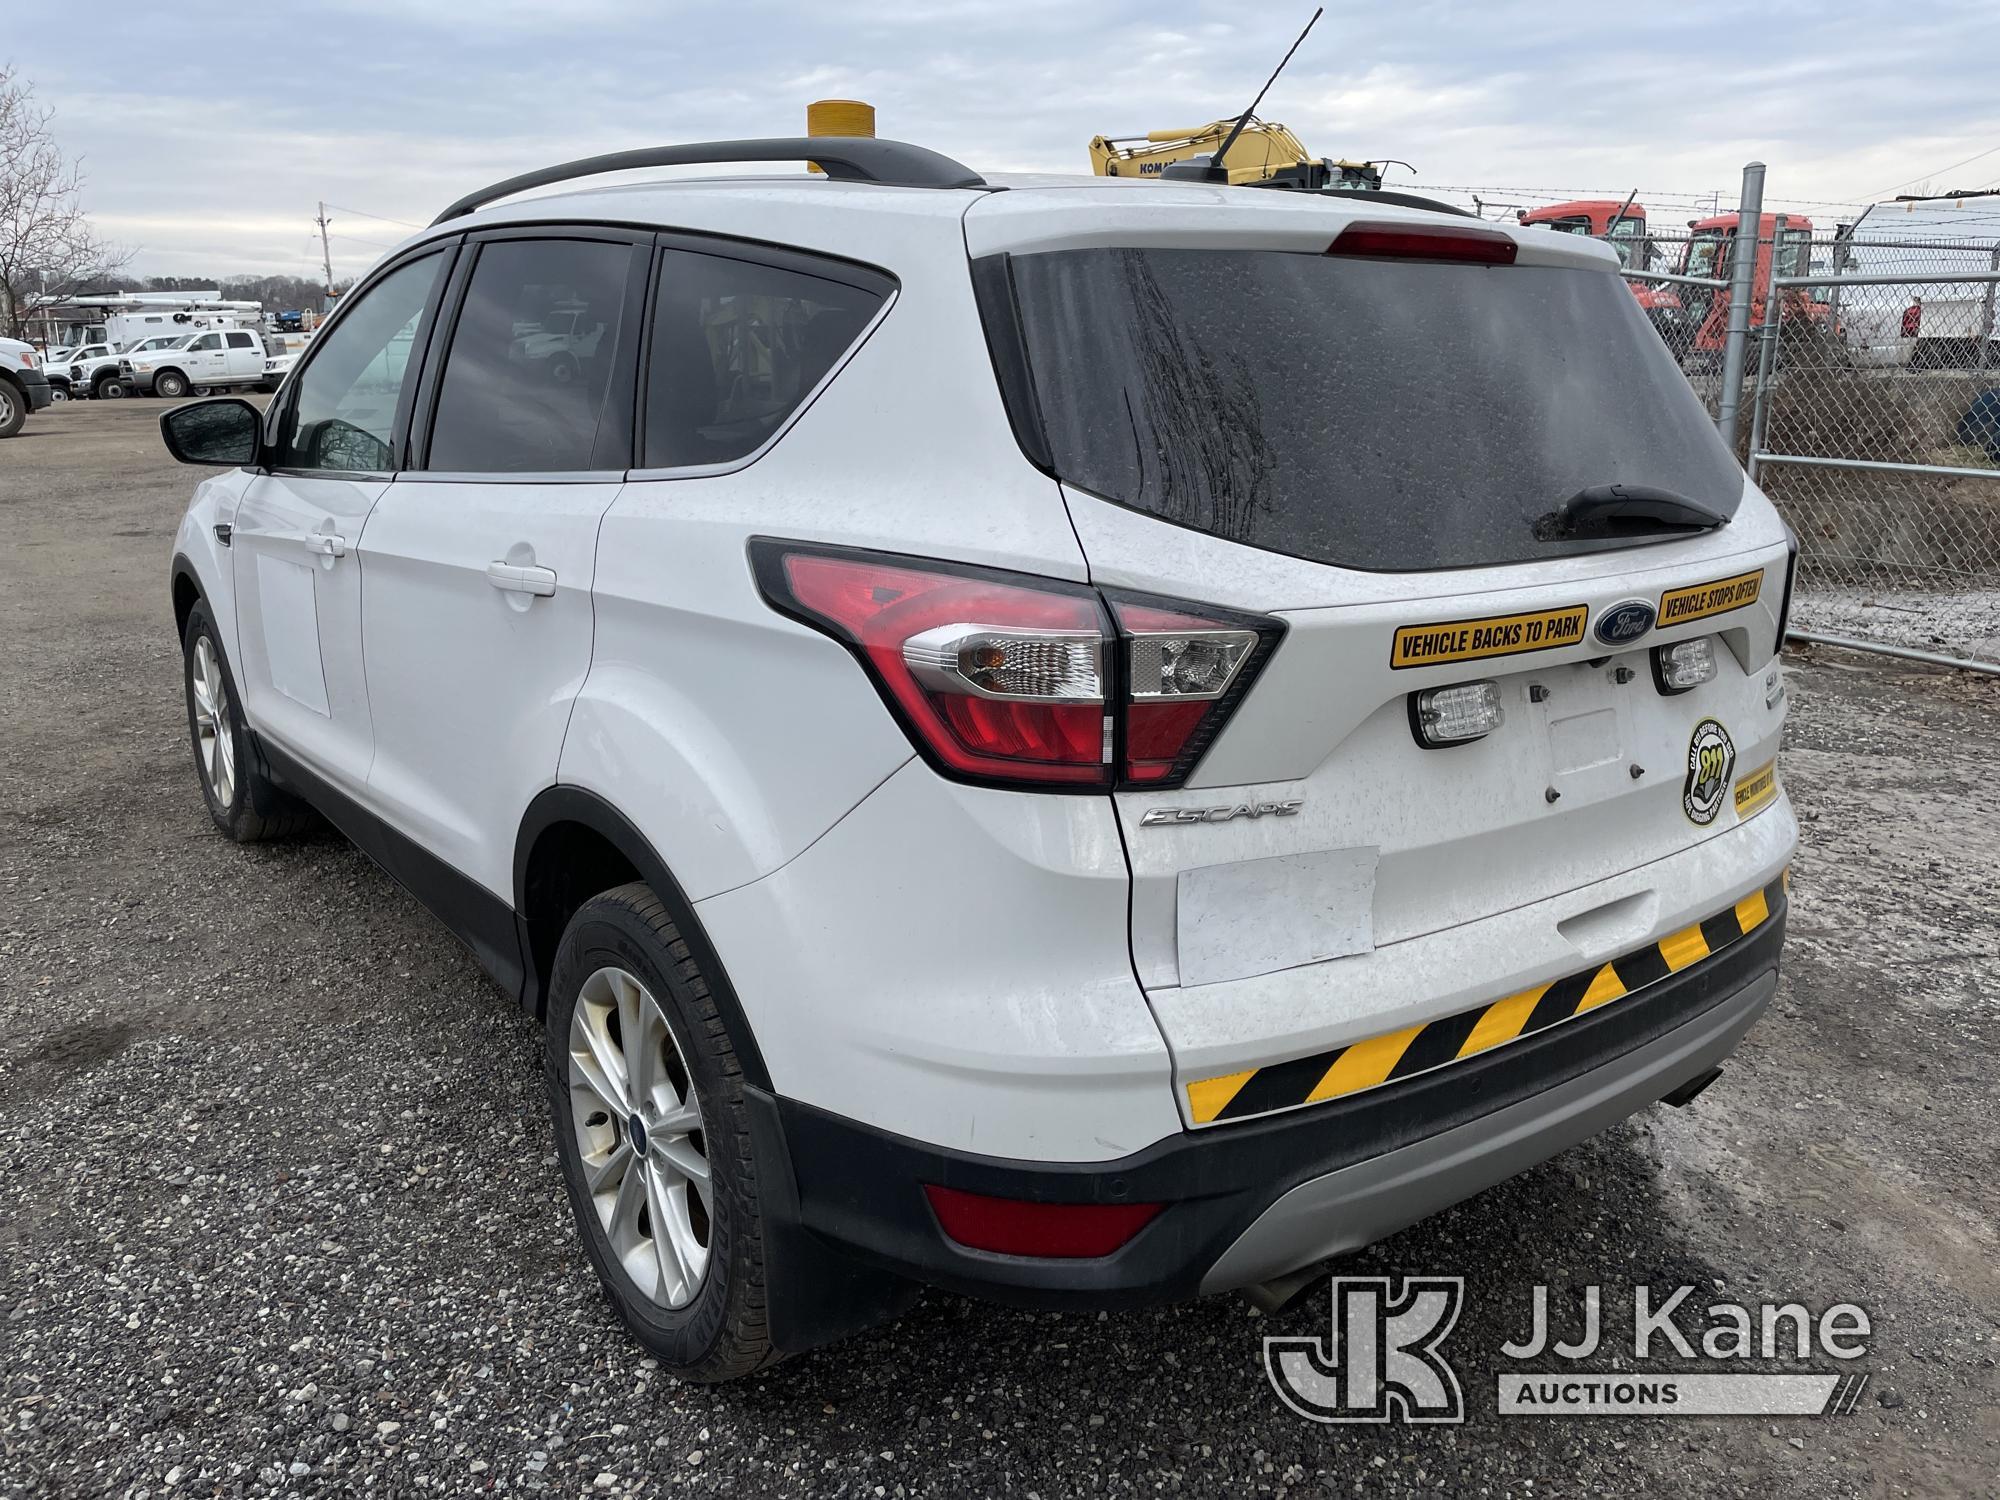 (Plymouth Meeting, PA) 2017 Ford Escape 4x4 4-Door Sport Utility Vehicle Bad Trans. Runs & Moves, Bo